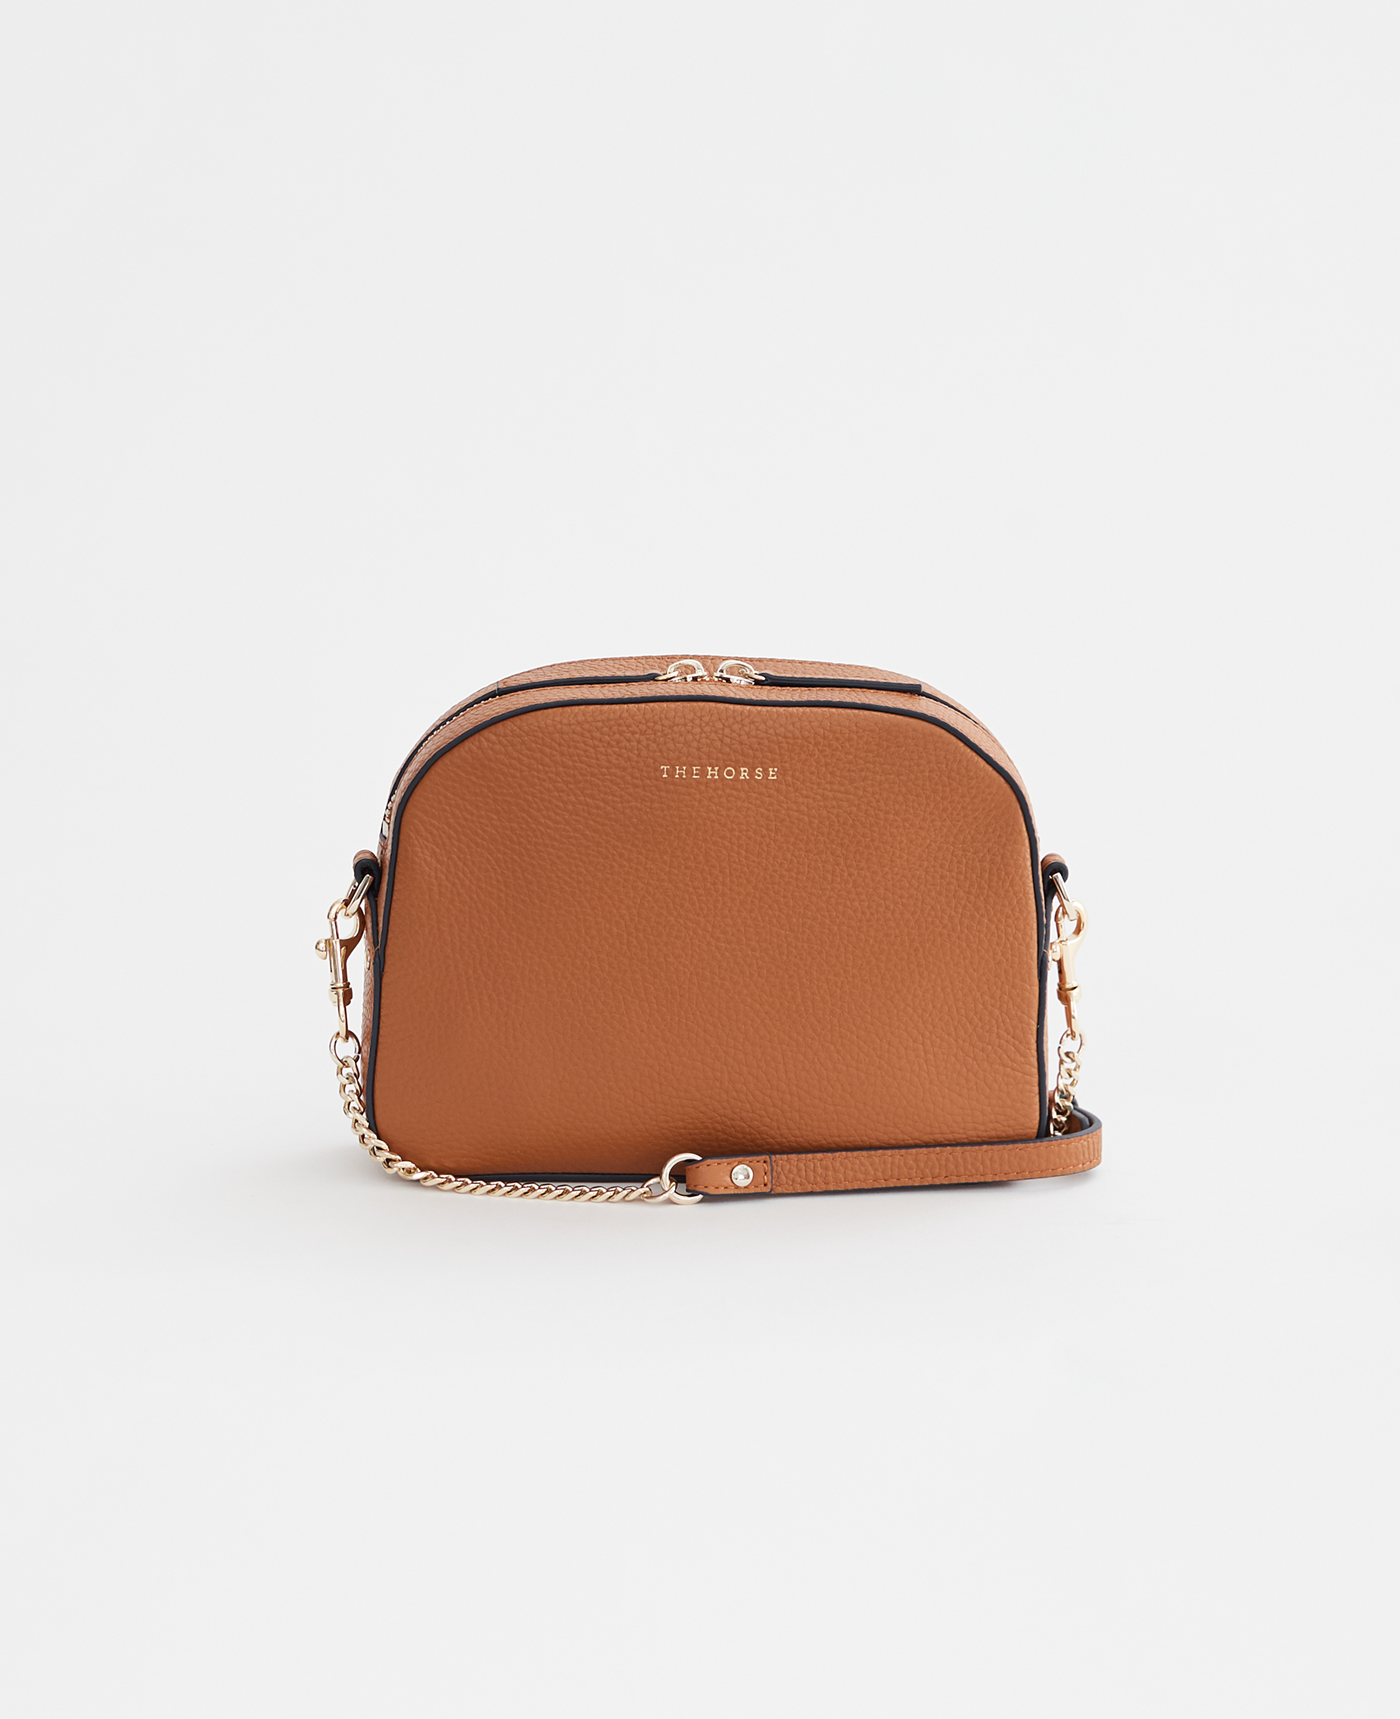 The Dome Bag: Women's Tan Leather Handbag by The Horse